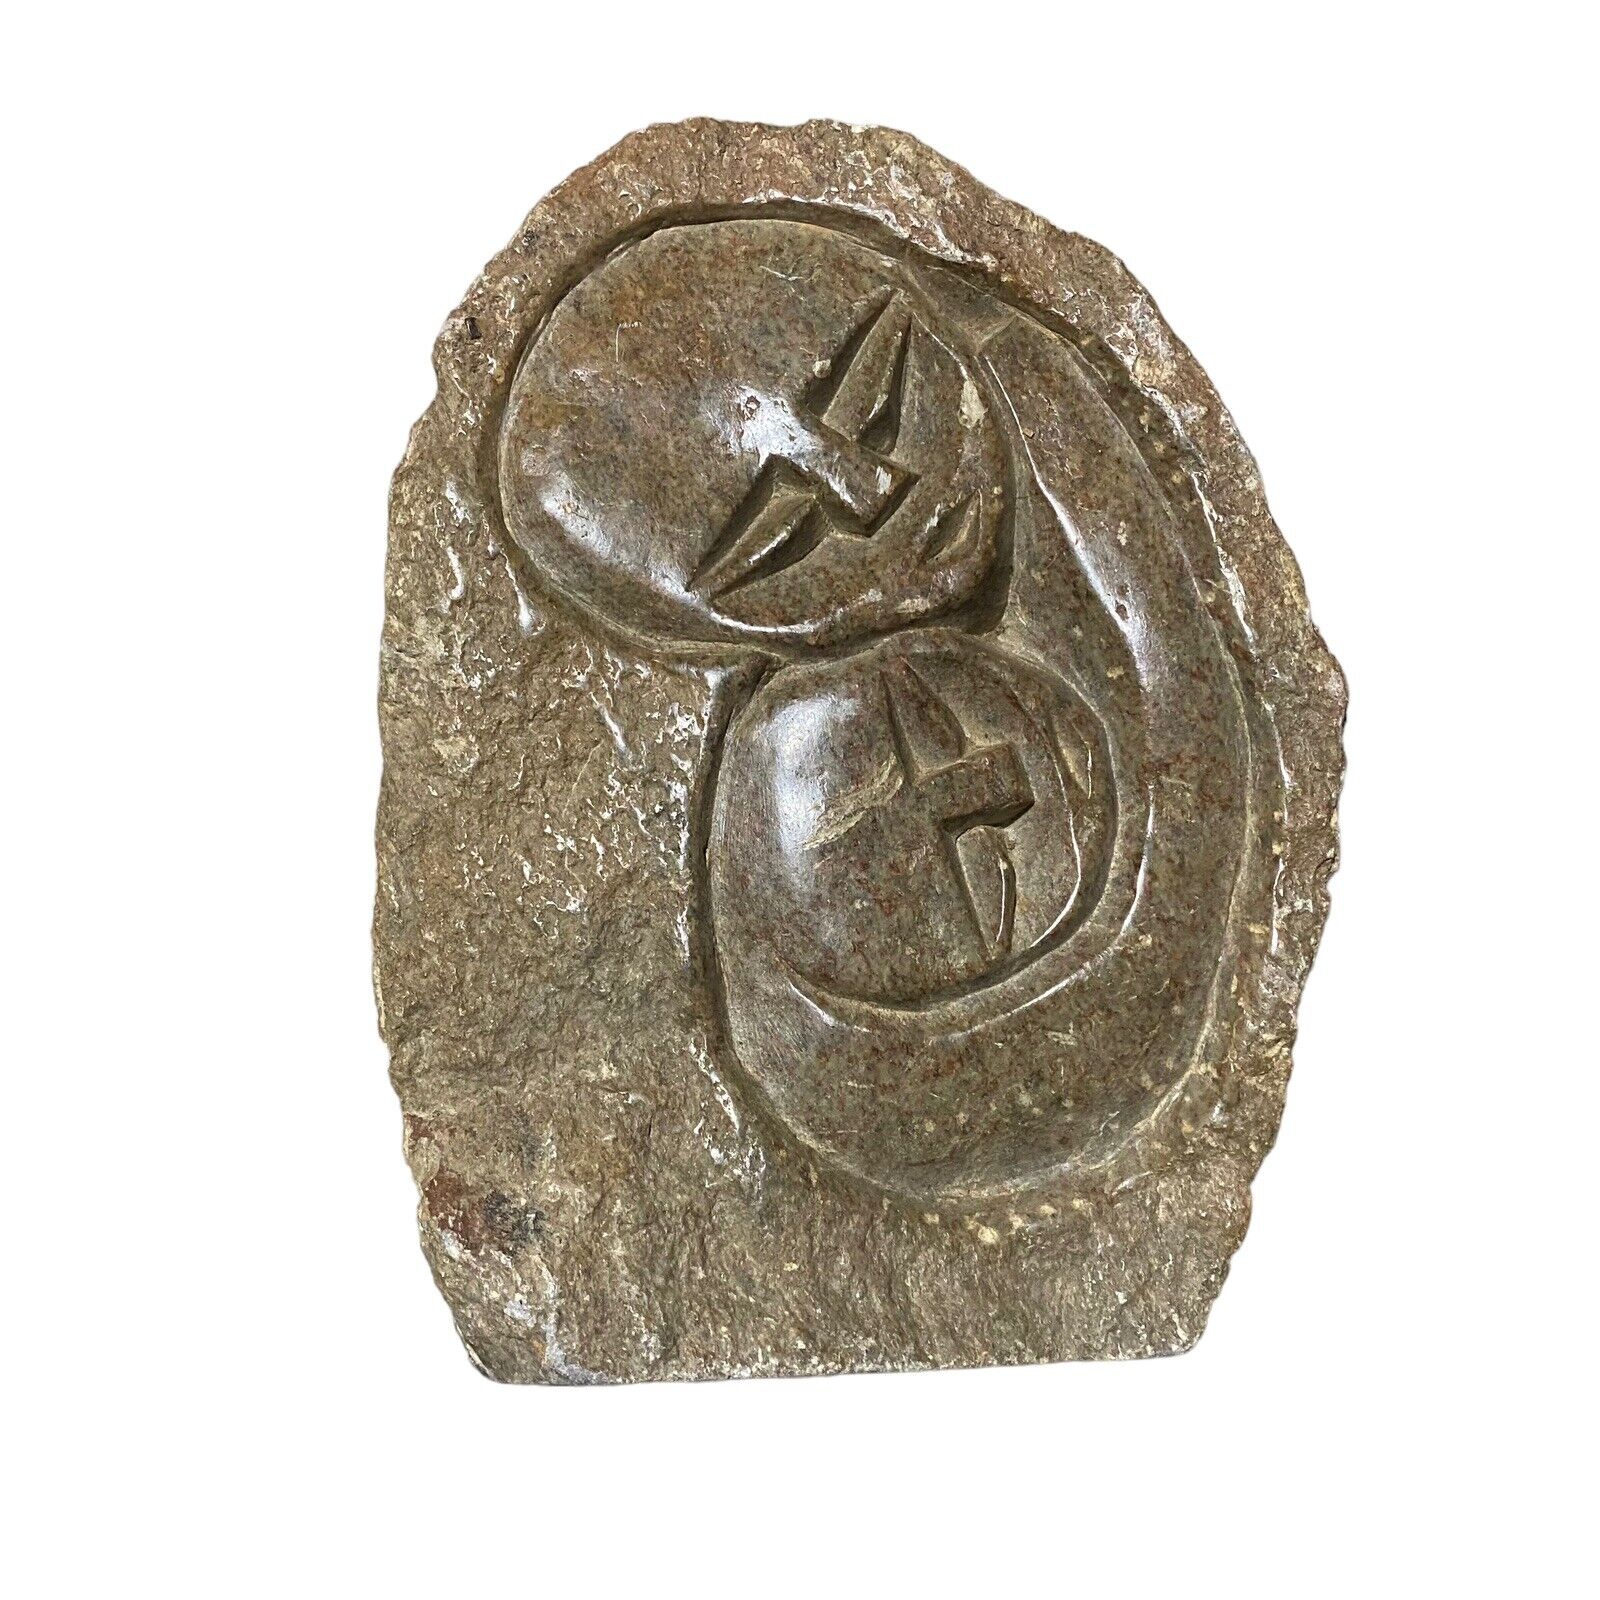 Zimbabwe Carved Shona Stone Madonna With Child in Rock Bed Sculpture